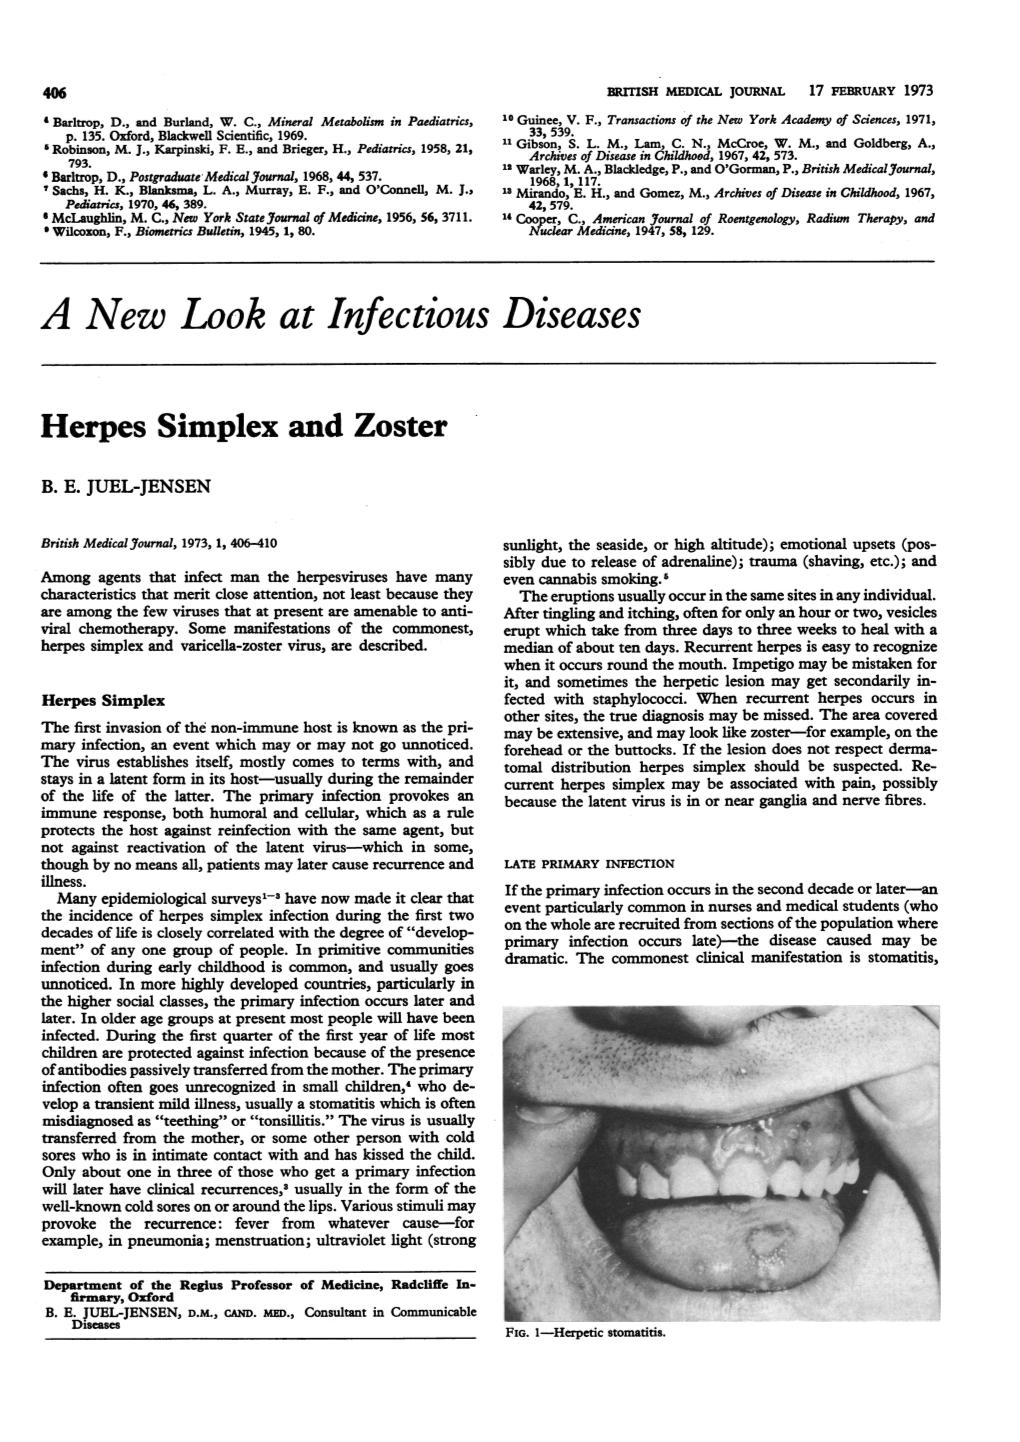 A New Look at Infectious Diseases